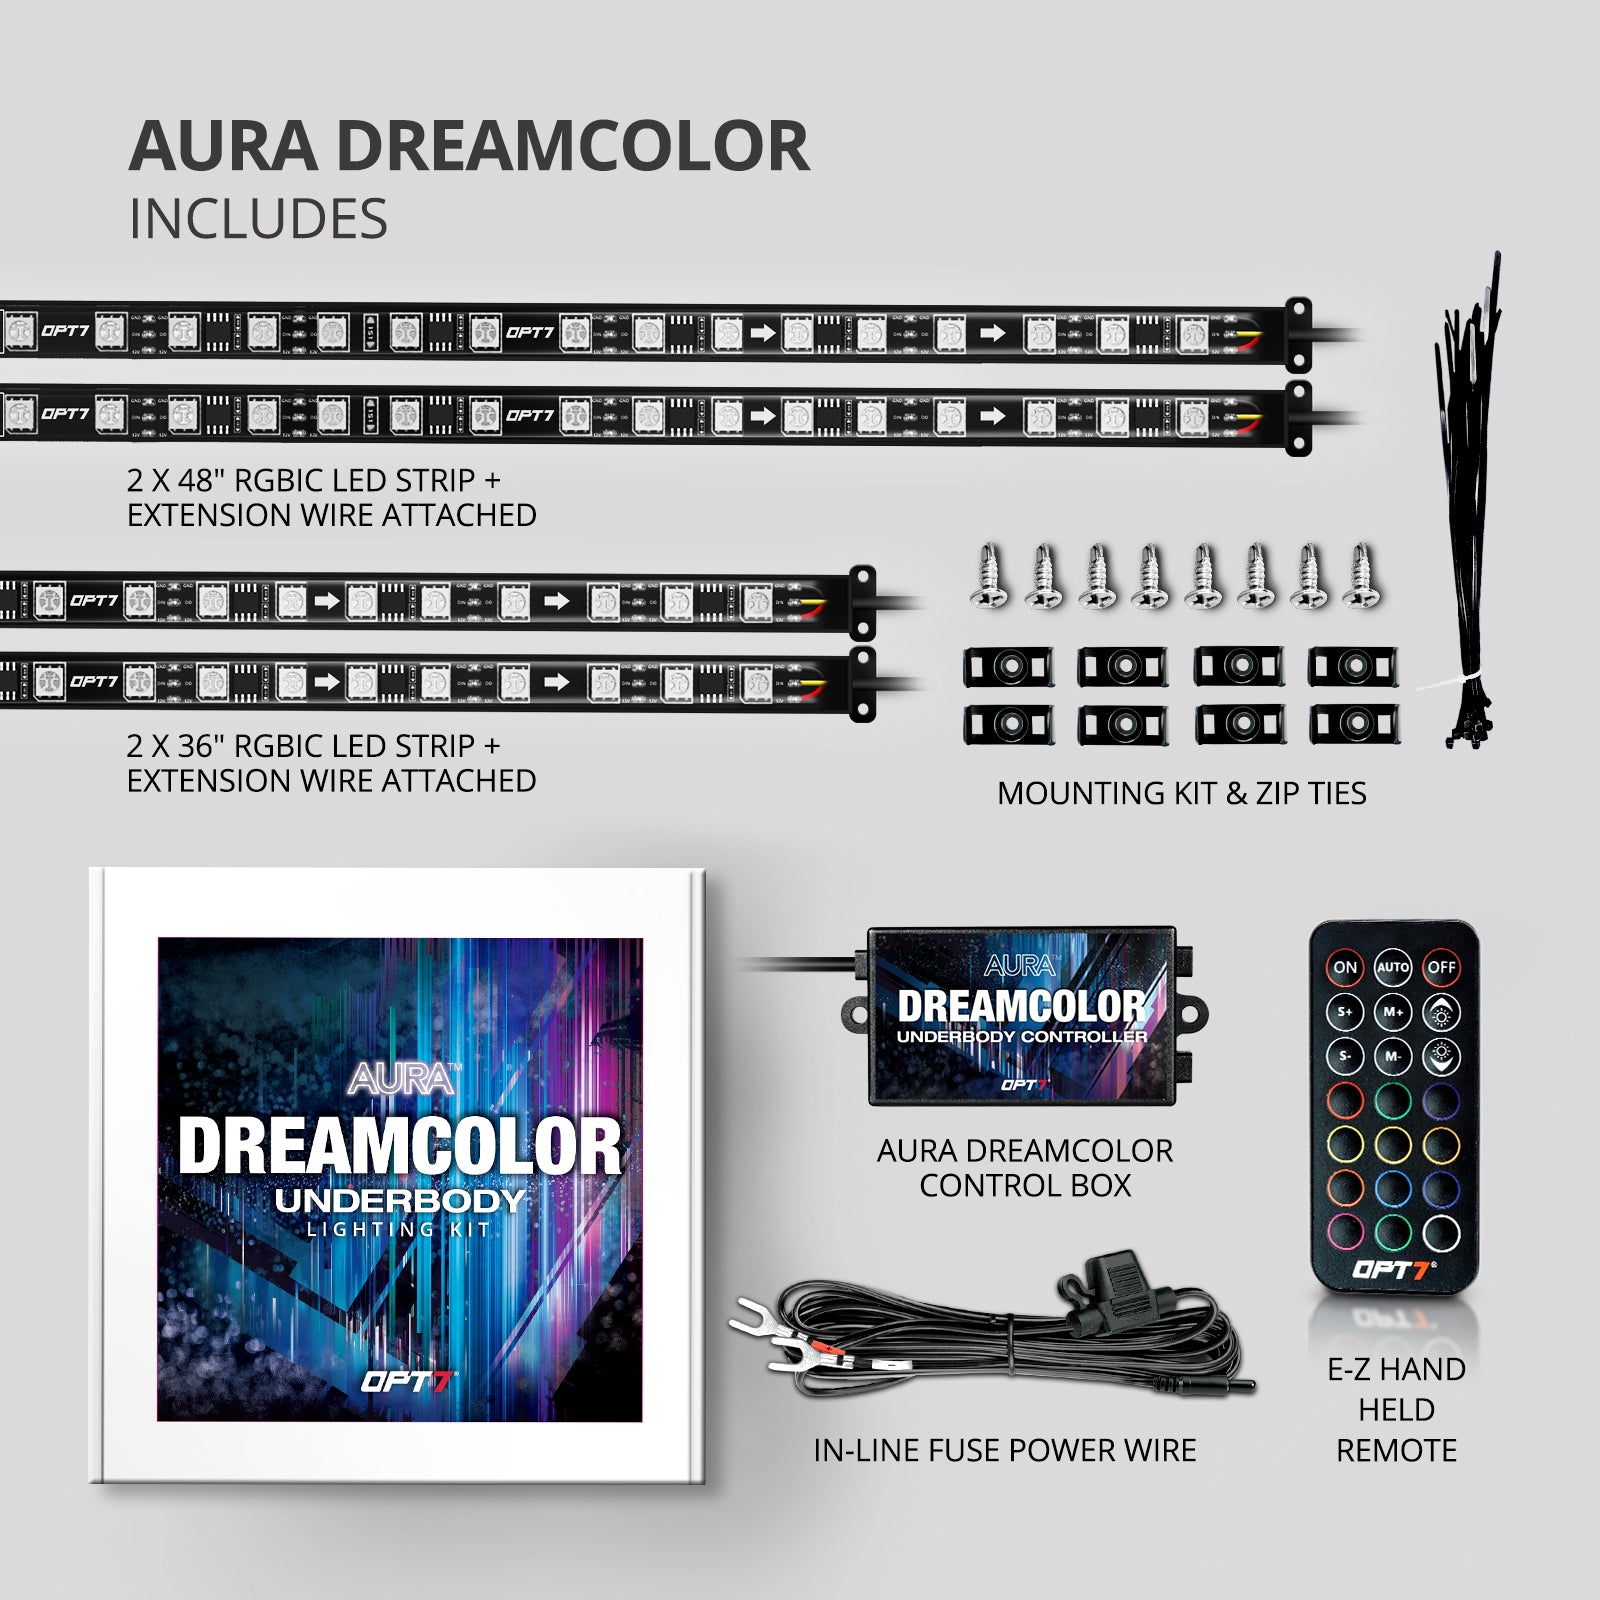 Fearless orientering Scene AURA Flexible LED DreamColor Underglow Lighting Strip Kit w-Remote – OPT7  Lighting Inc